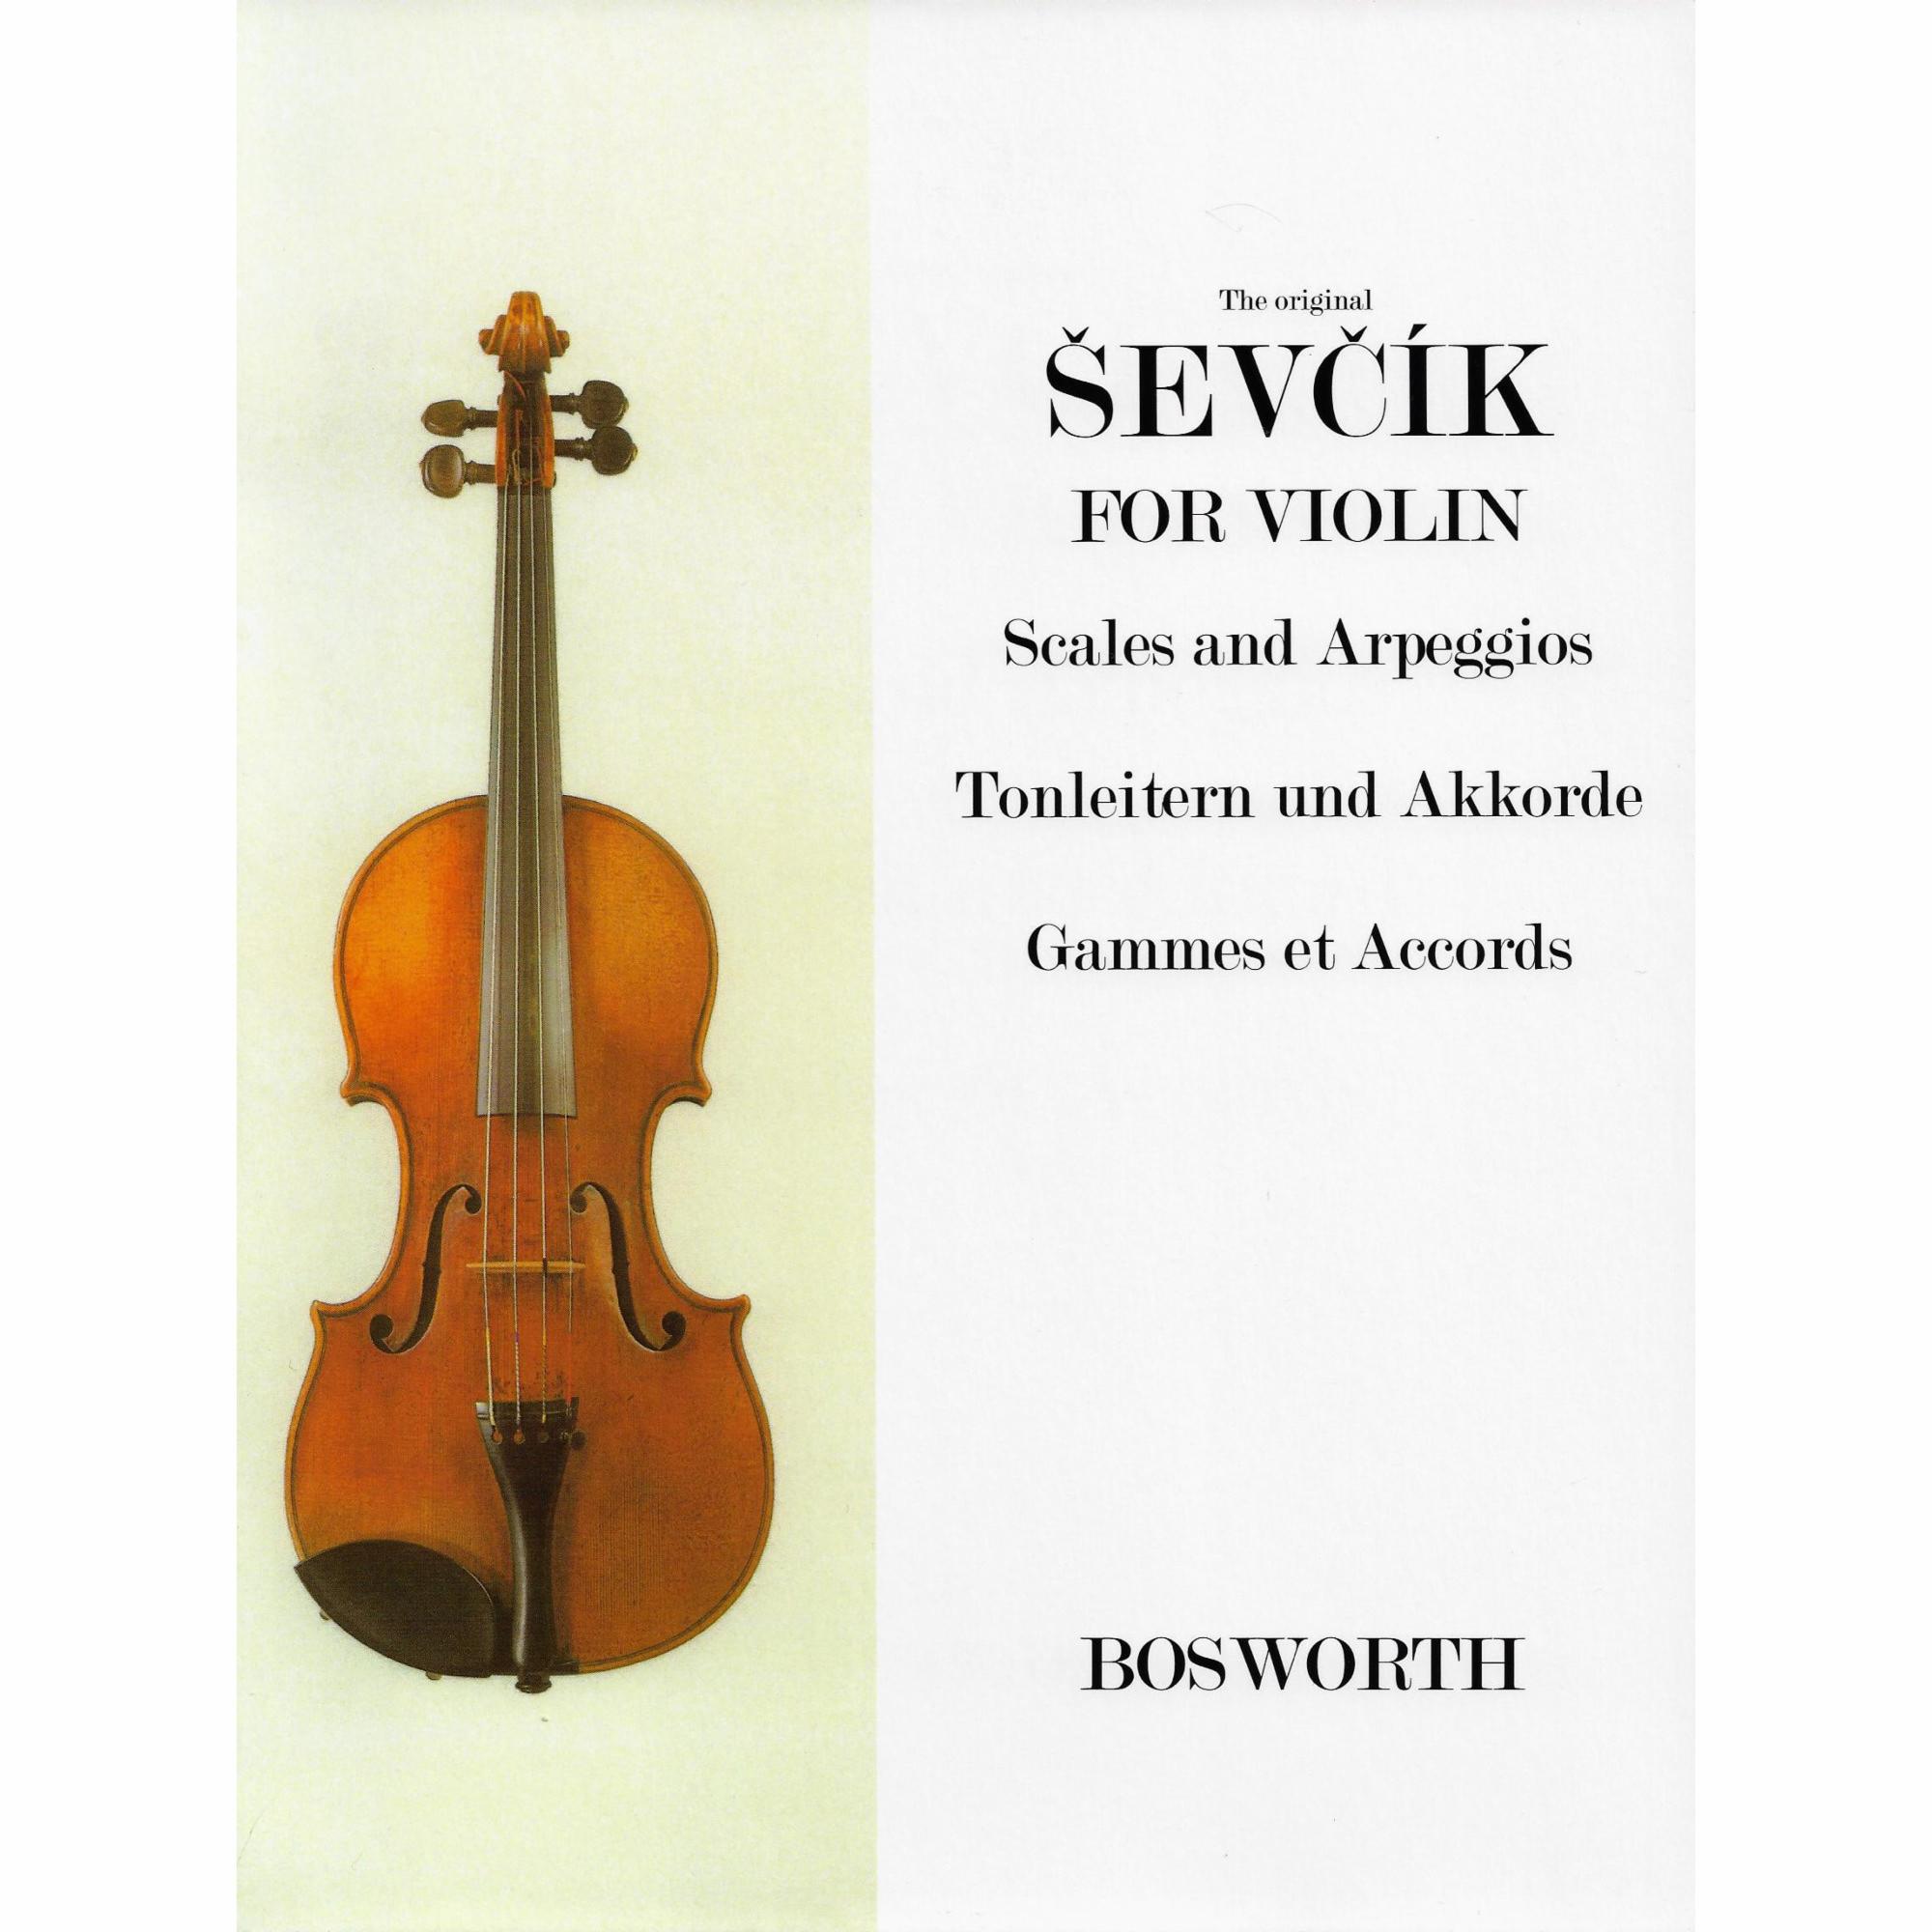 Sevcik -- Scales and Arpeggios for Violin